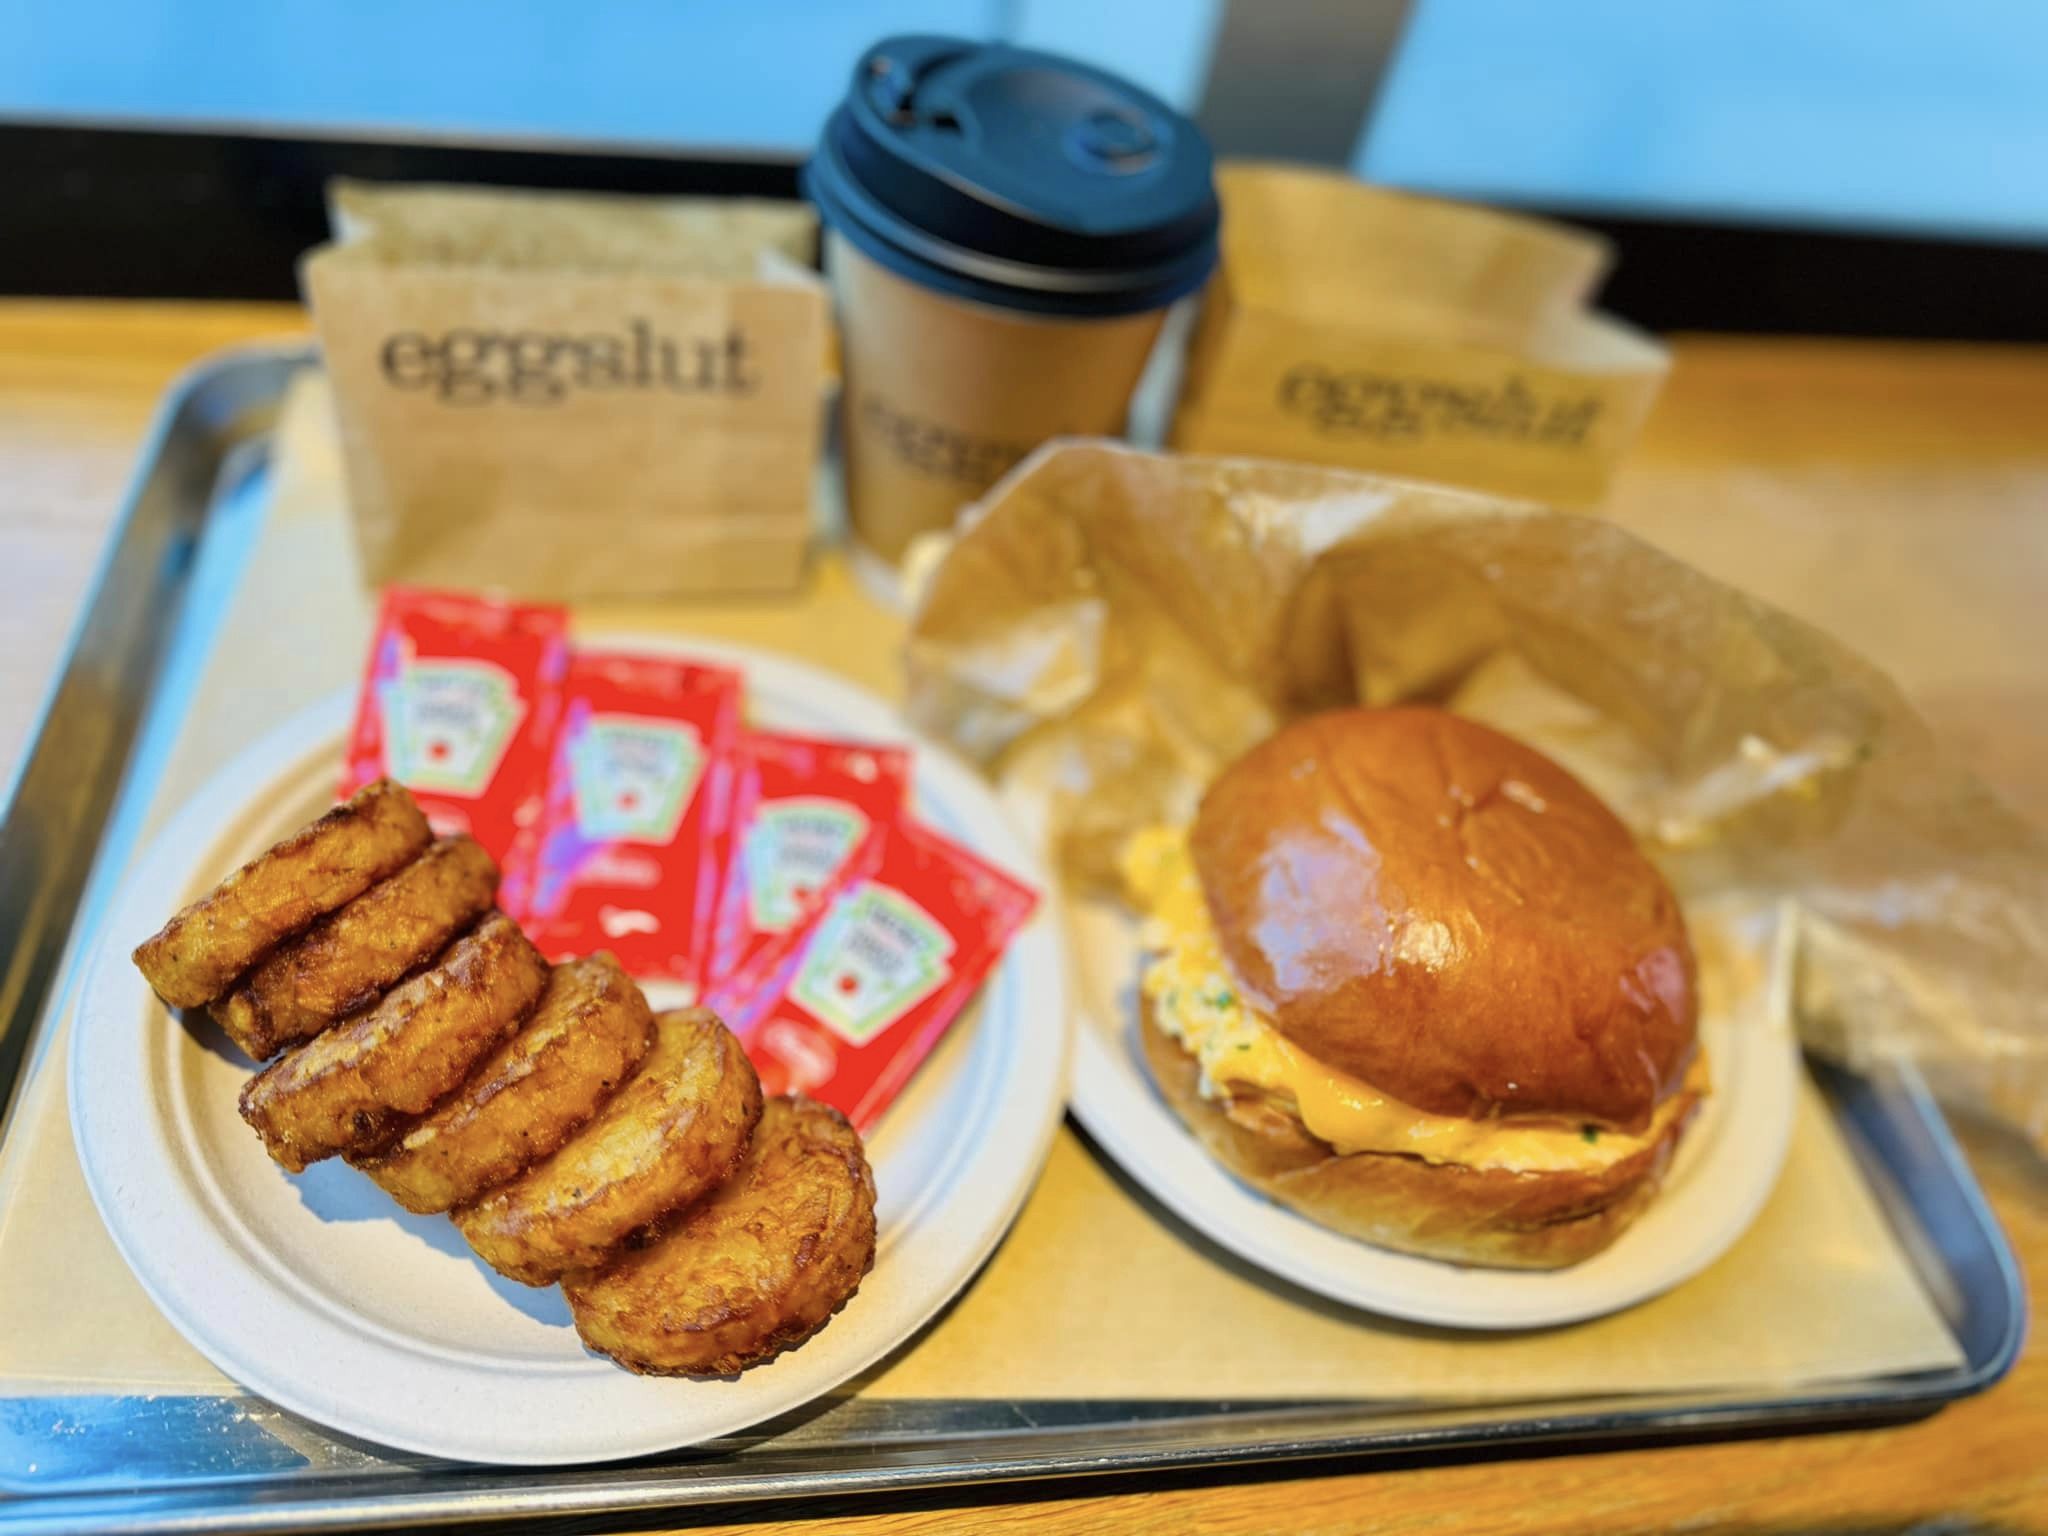 Eggslut Scotts Square is Good though Pricey